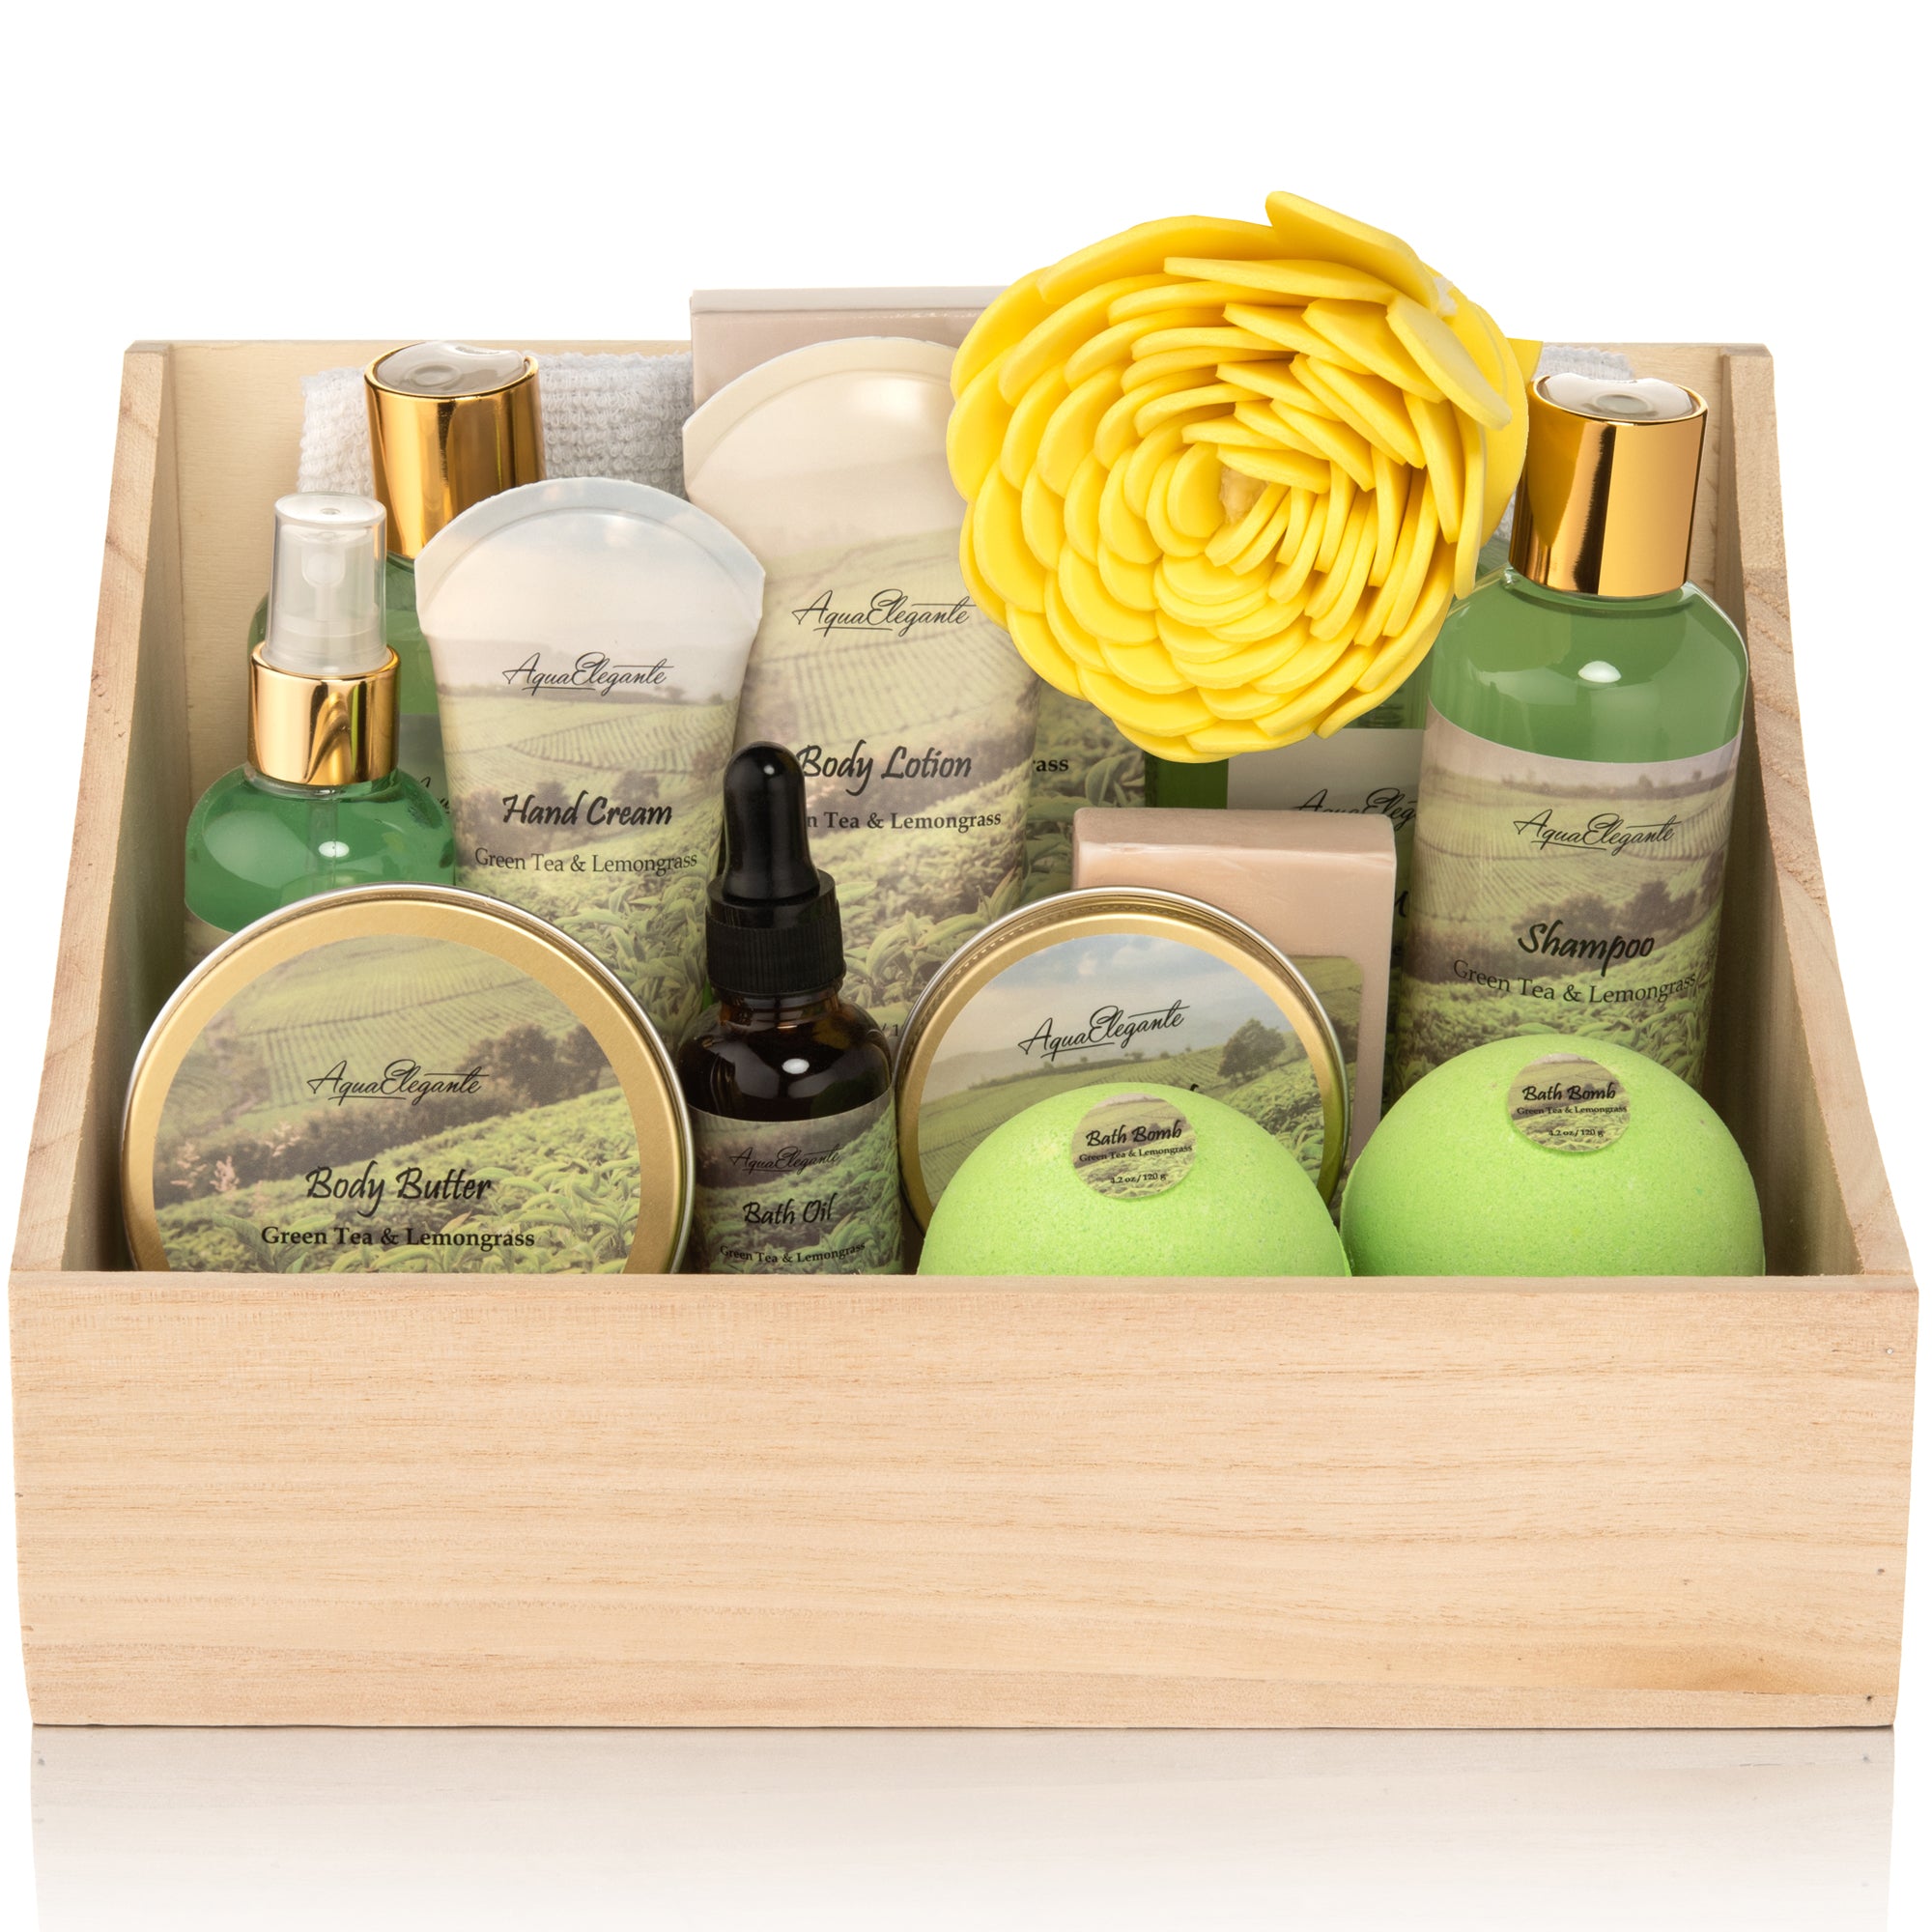 Argan Oil & Champagne Gift Set - Spa Gifts For Her Baskets